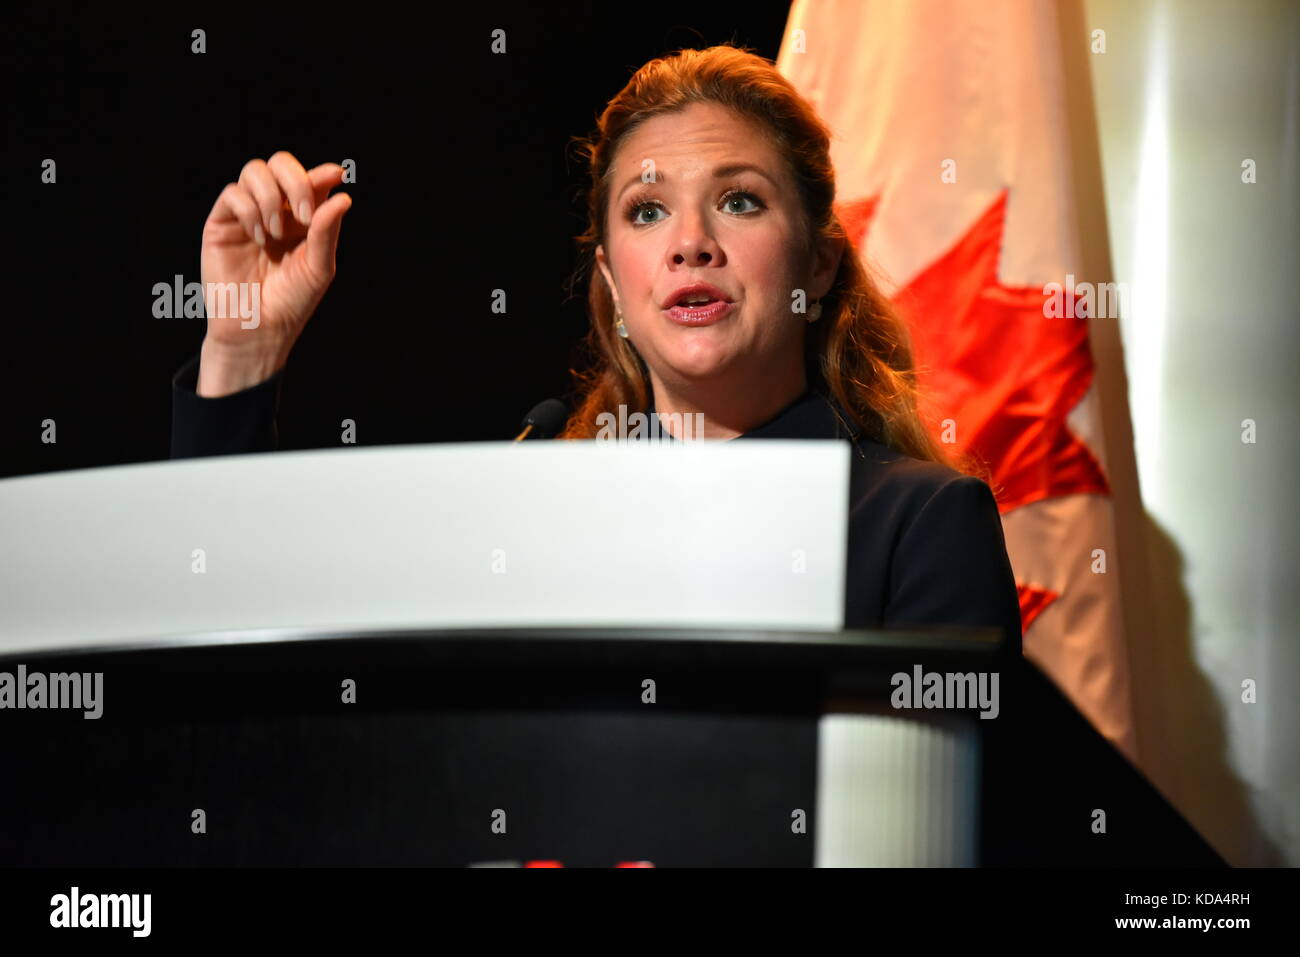 Madam Sophie Gregoire Trudeau, the wife of Canadian Prime Minister Justin Trudeau, addresses the Together for Girls organization on October 11th, the International Day of the Girl at the Canadian Embassy in Washington DC. She discusses breaking the cycle of violence against girls. Ms. Trudeau is an advocate for gender equality and women's and girls' rights and freedoms. Together for Girls is a global public-private partnership dedicated to ending violence against children. Photo by Sharon Natoli Stock Photo